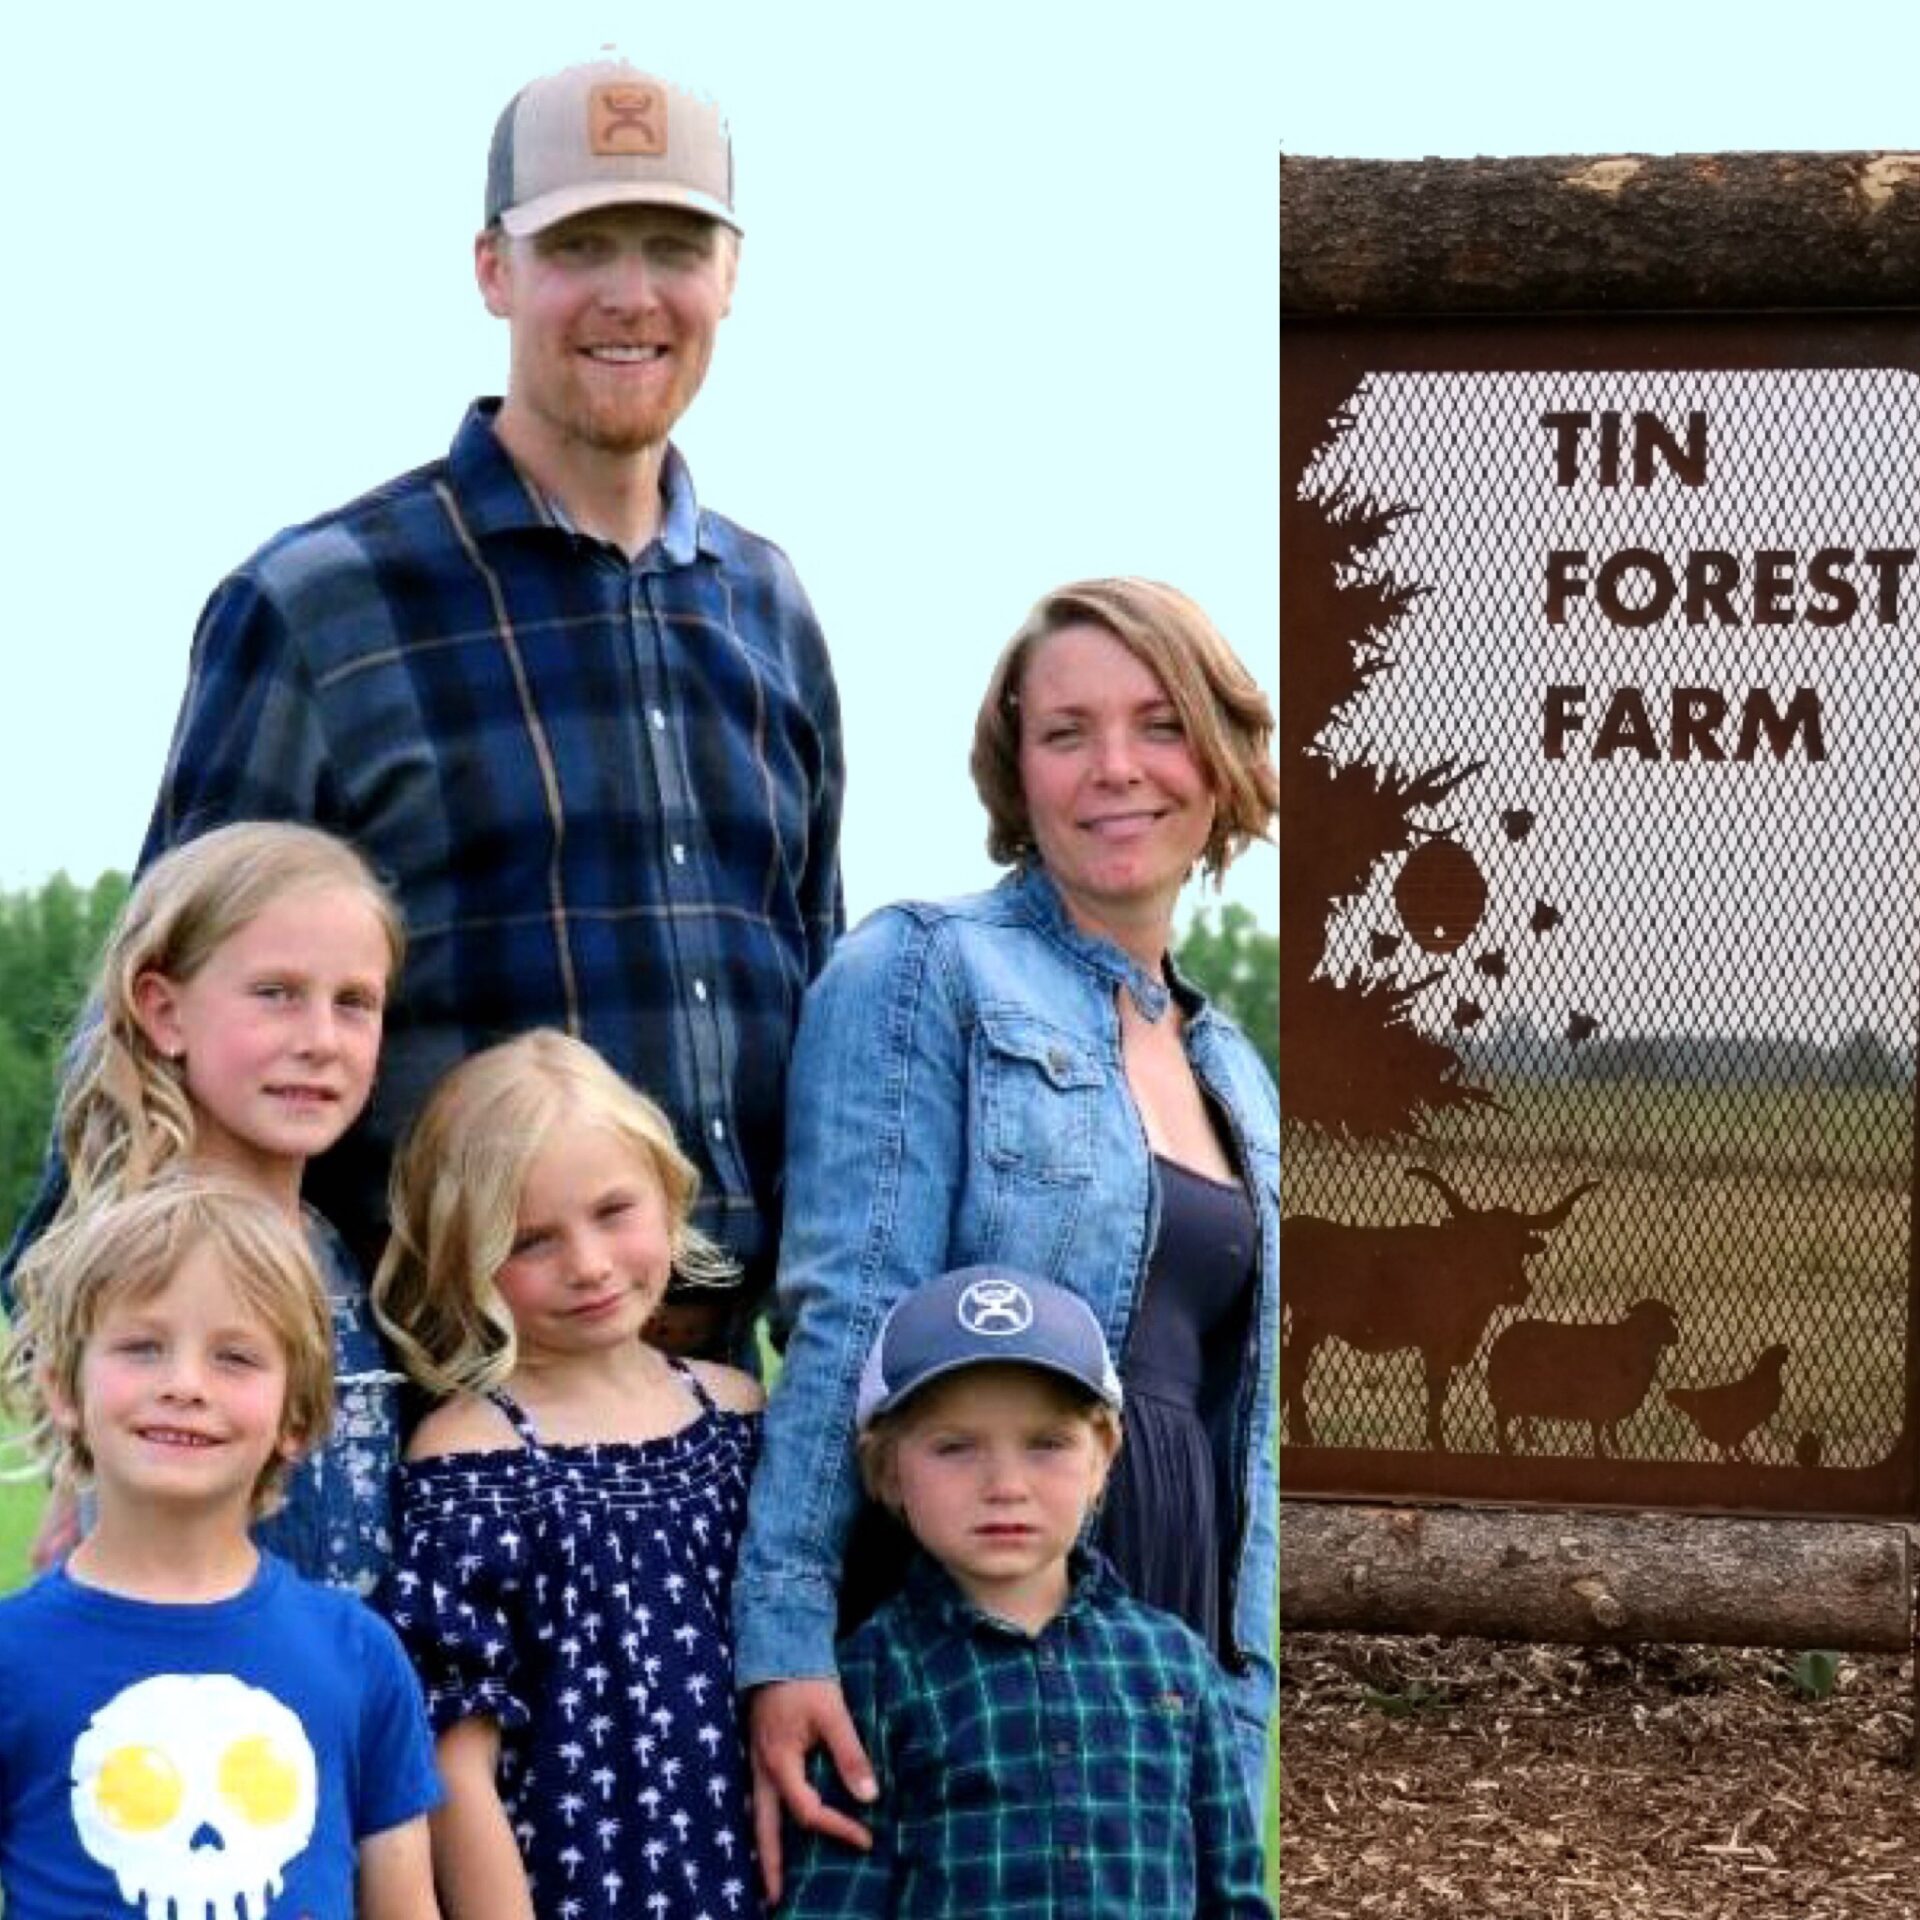 Congratulations to ALUS Wetaskiwin-Leduc participants Alana and Justin Schamber of Tin Forest Farm, who have been awarded a 2018 OTIS Award by the Battle River Watershed Alliance for their excellence as wetland caretakers who also work to raise awareness through farm tours and kids camps.